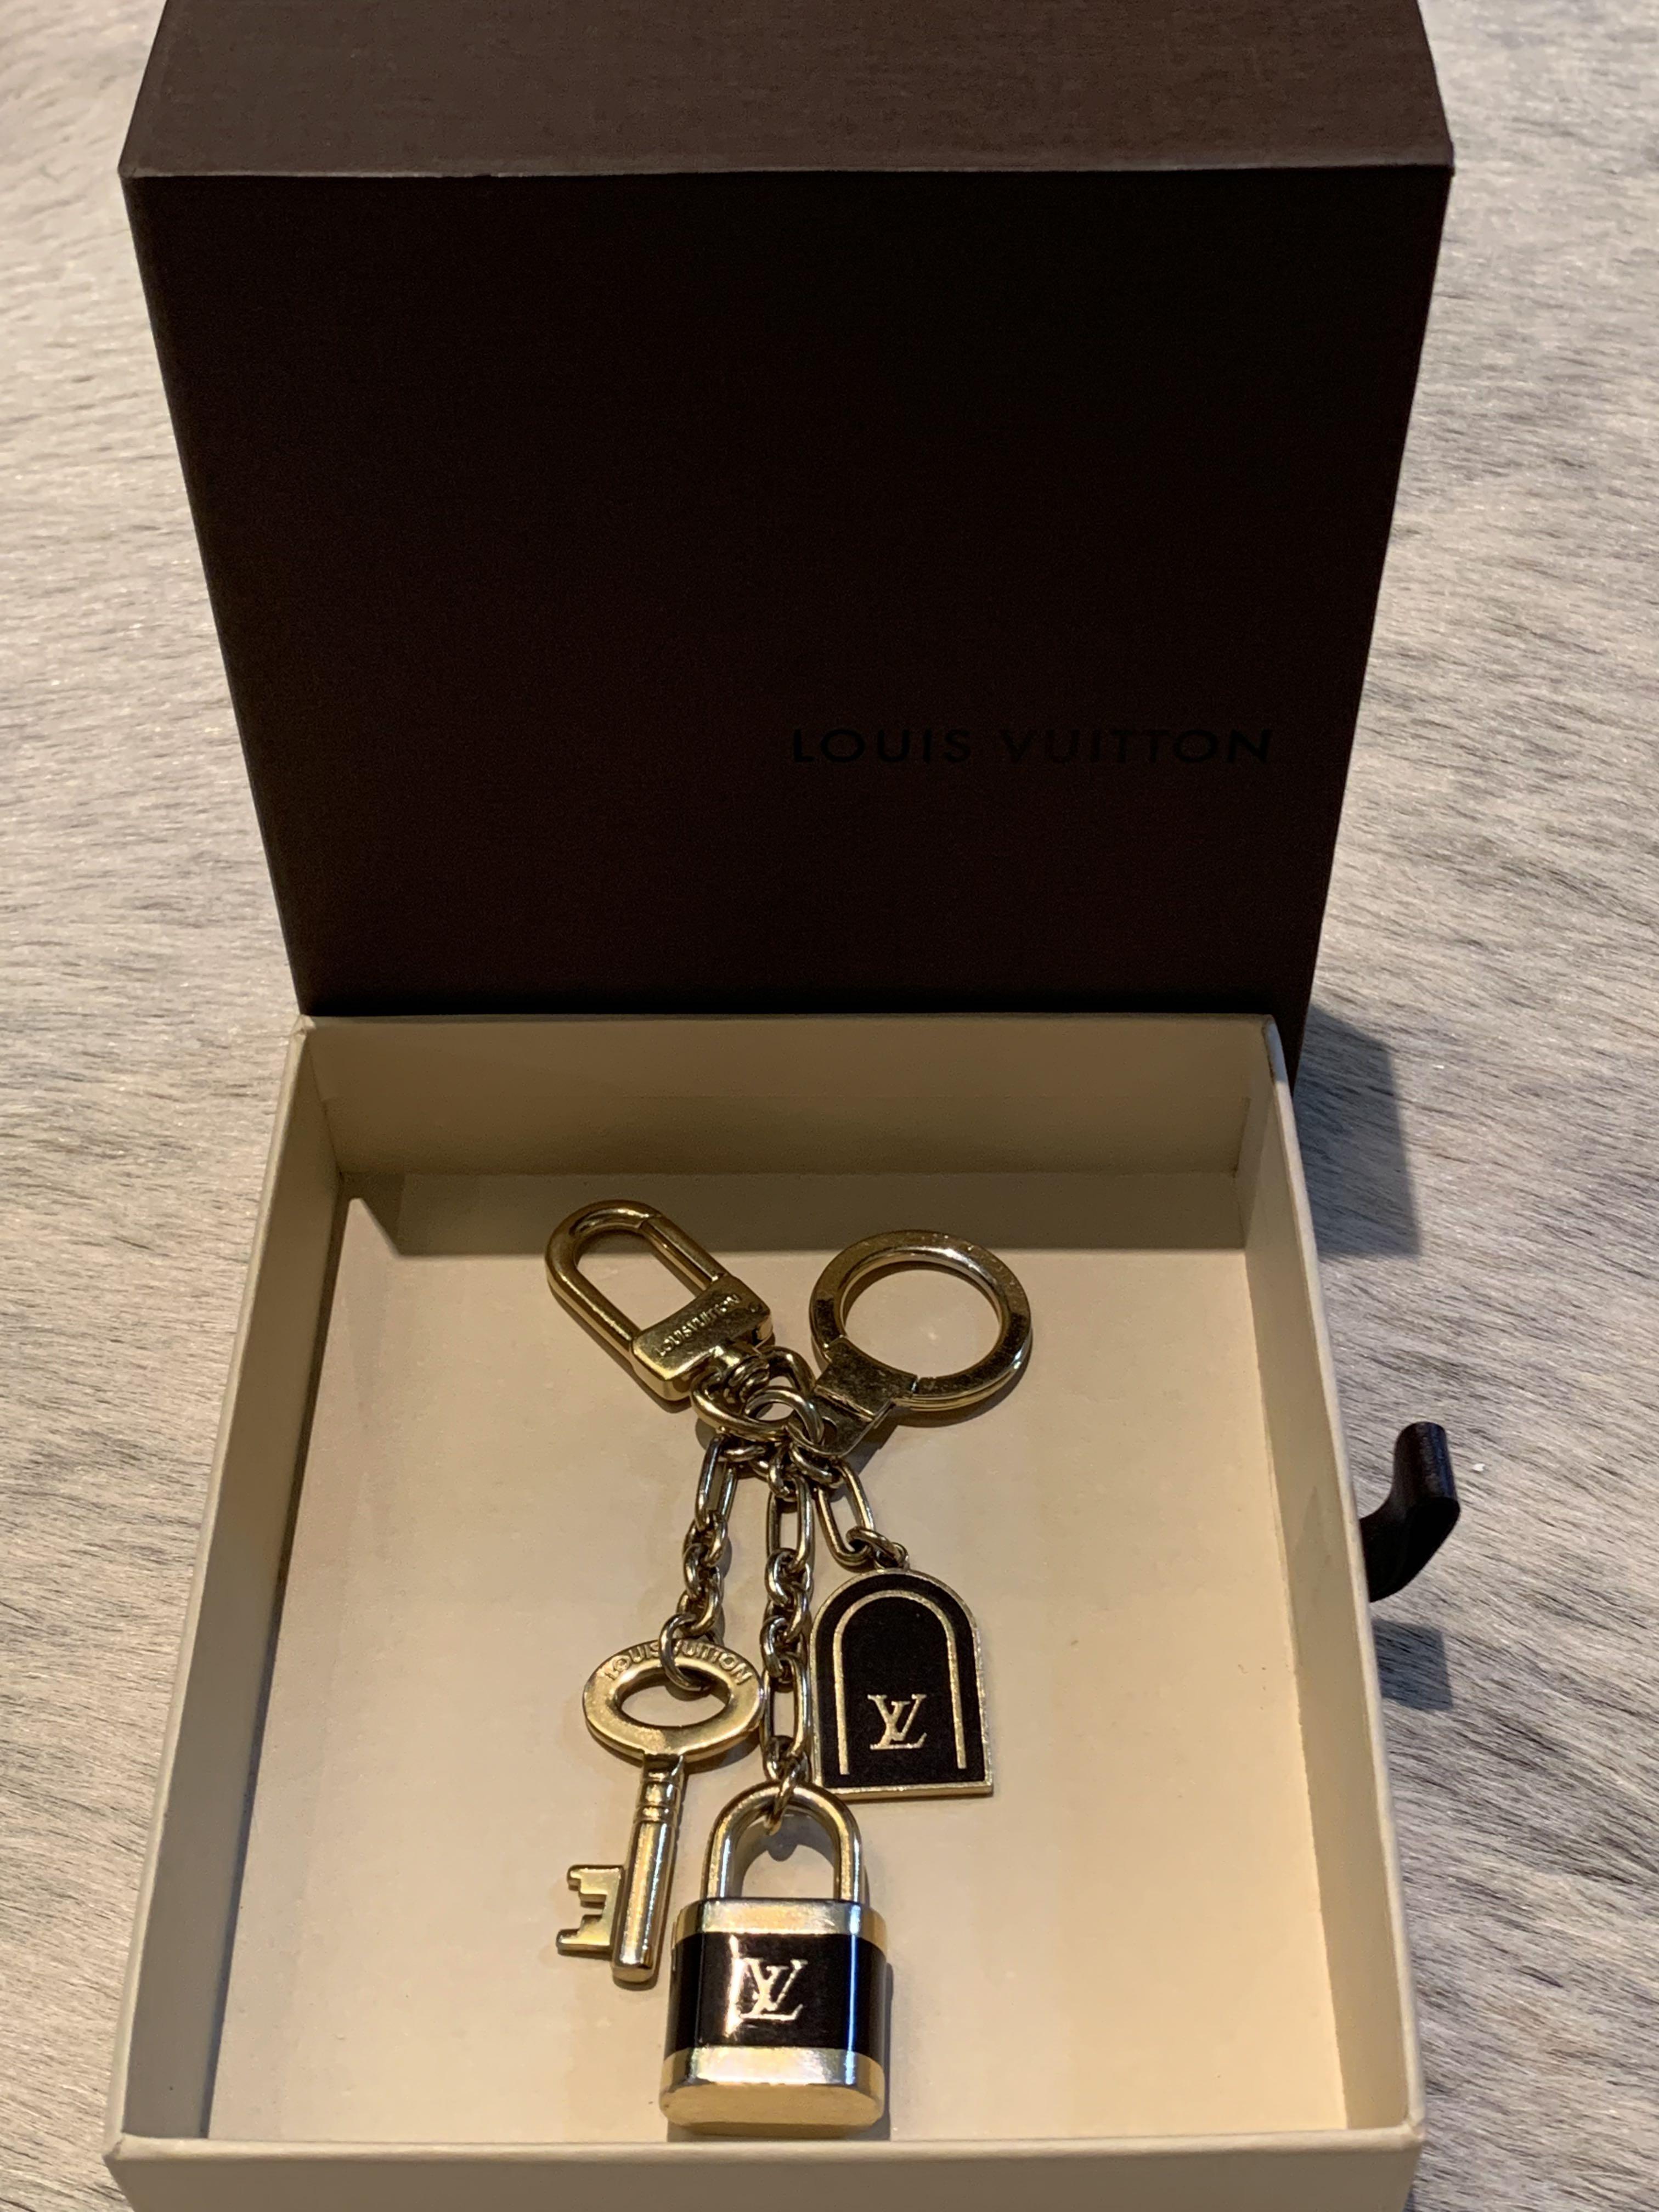 Louis Vuitton Burgundy/Gold Key and Lock Key Holder and Bag Charm